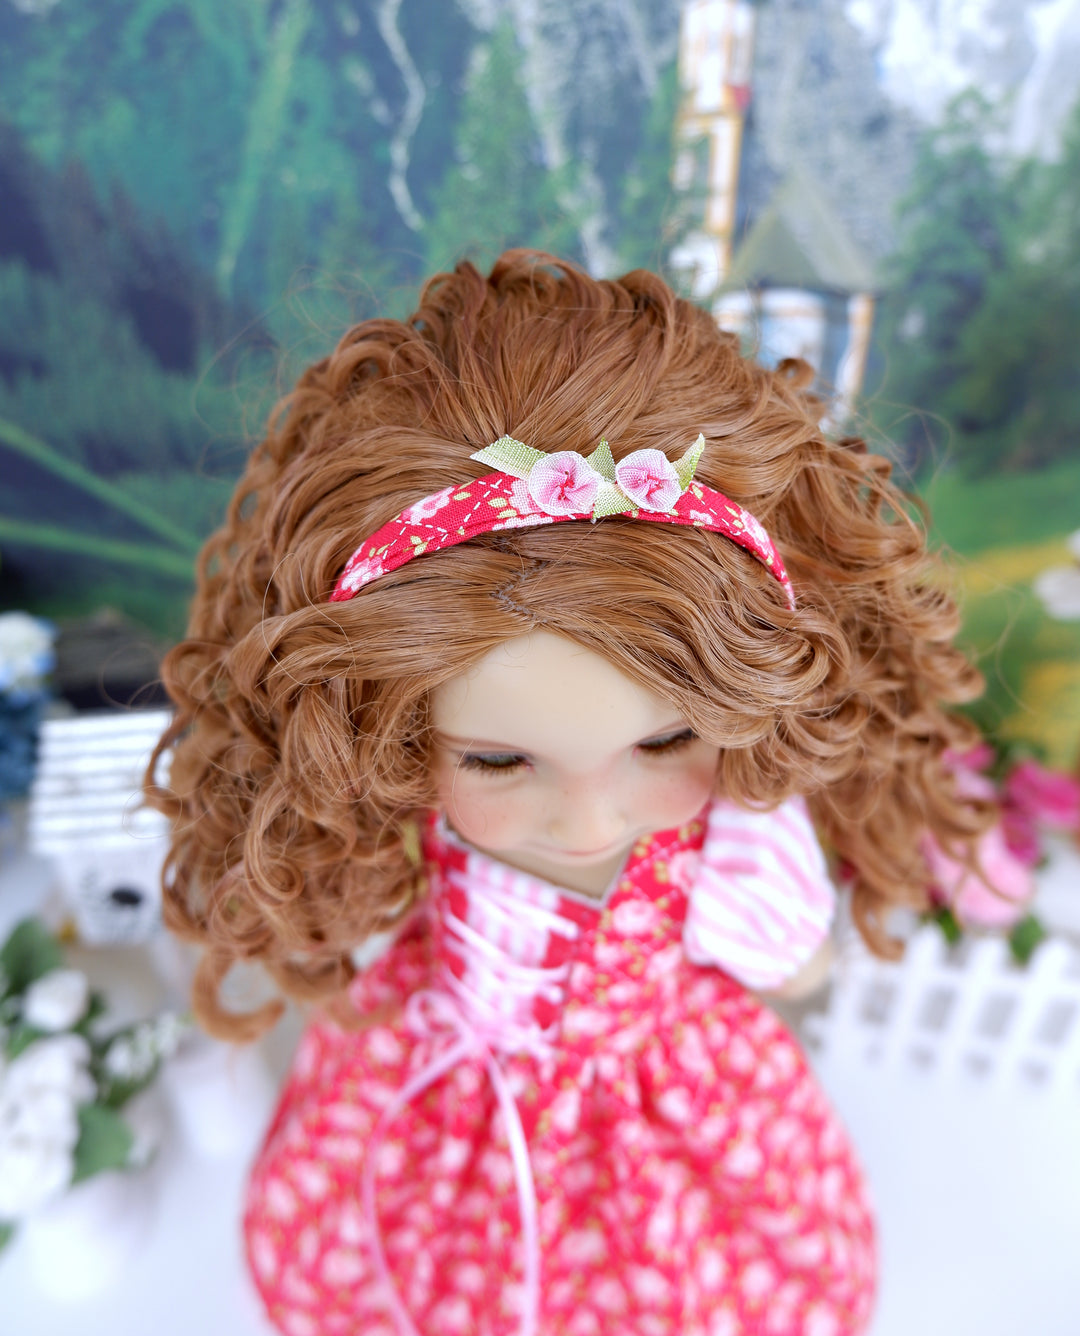 Alpine Rose - dress ensemble with shoes for Ruby Red Fashion Friends doll